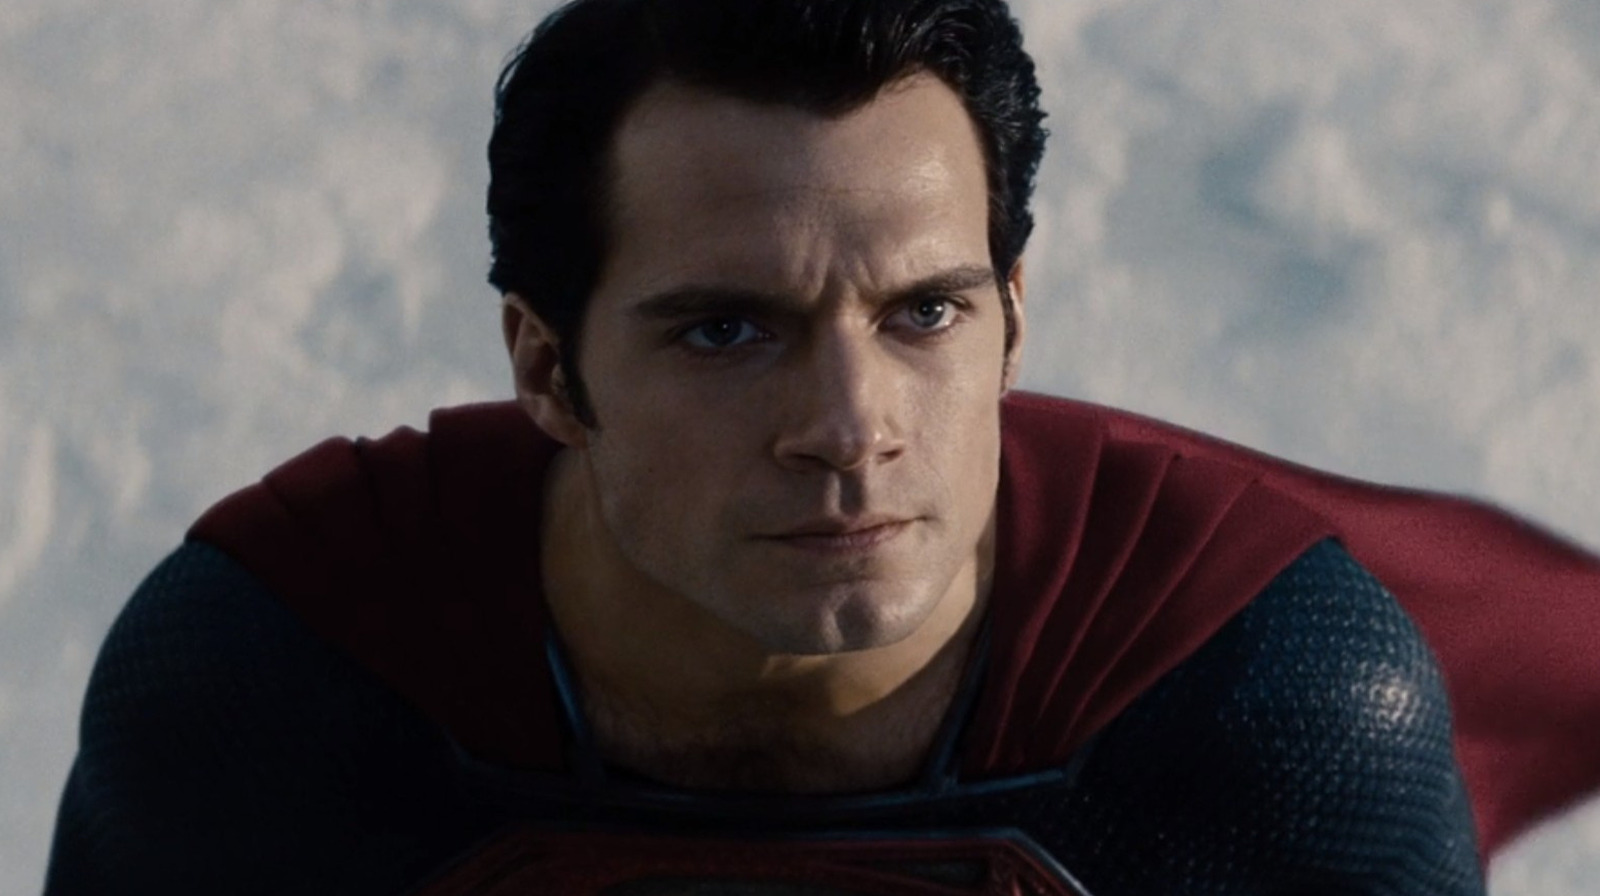 Man of Steel' Review: Movie (2013) – The Hollywood Reporter